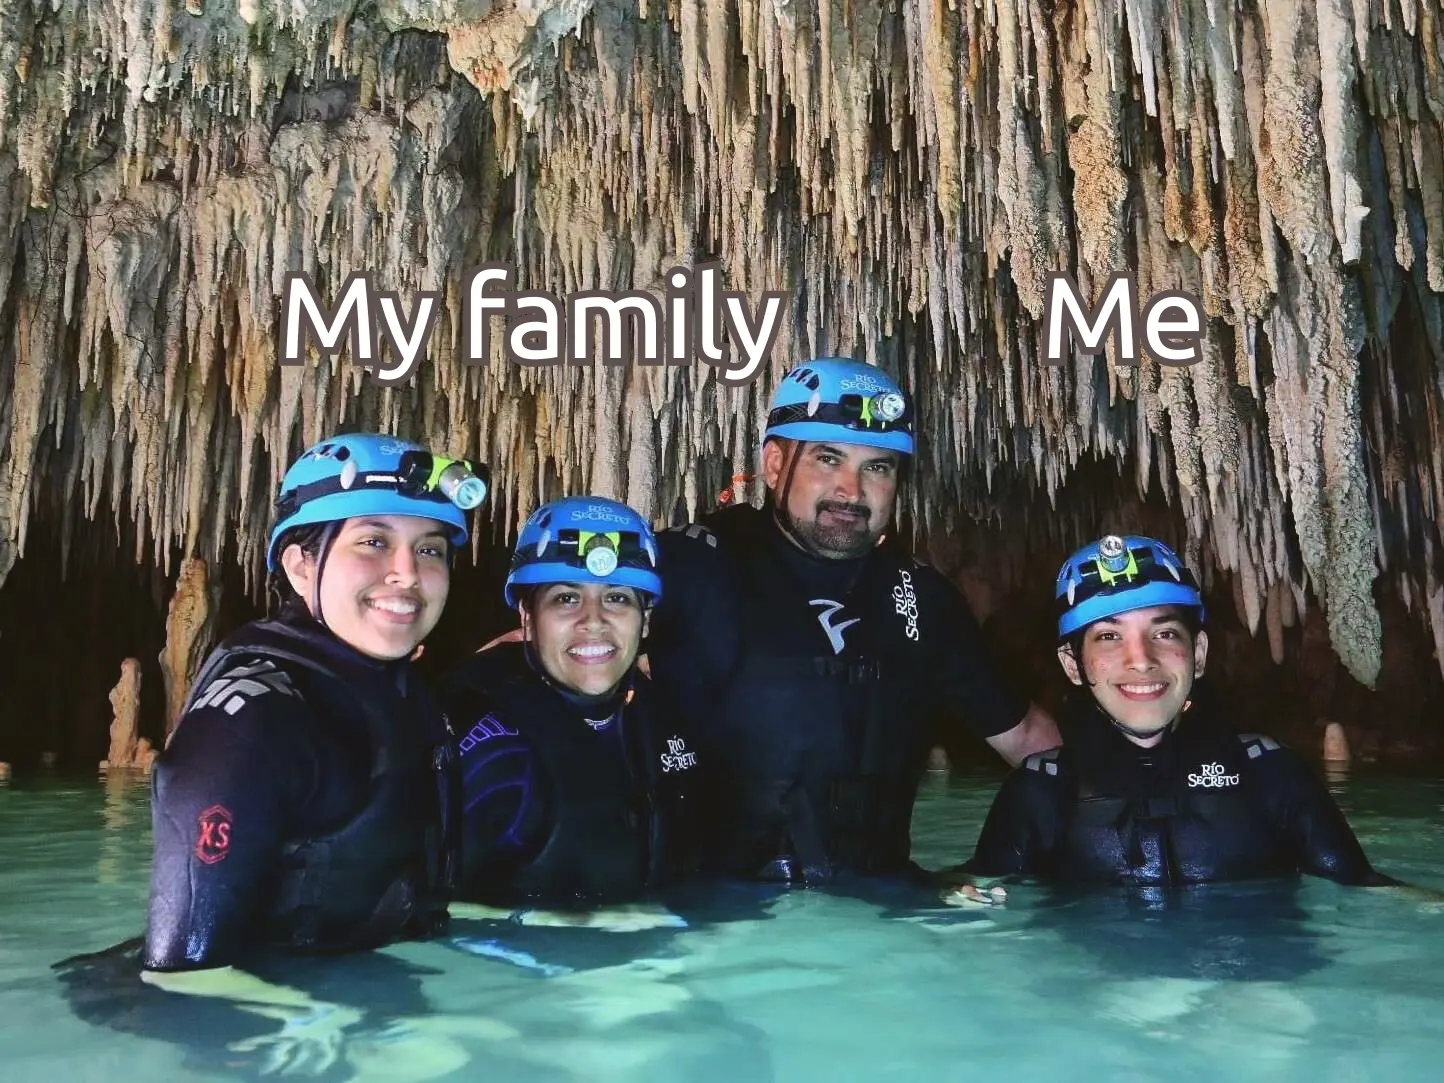 A photo of my family and I exploring a cave